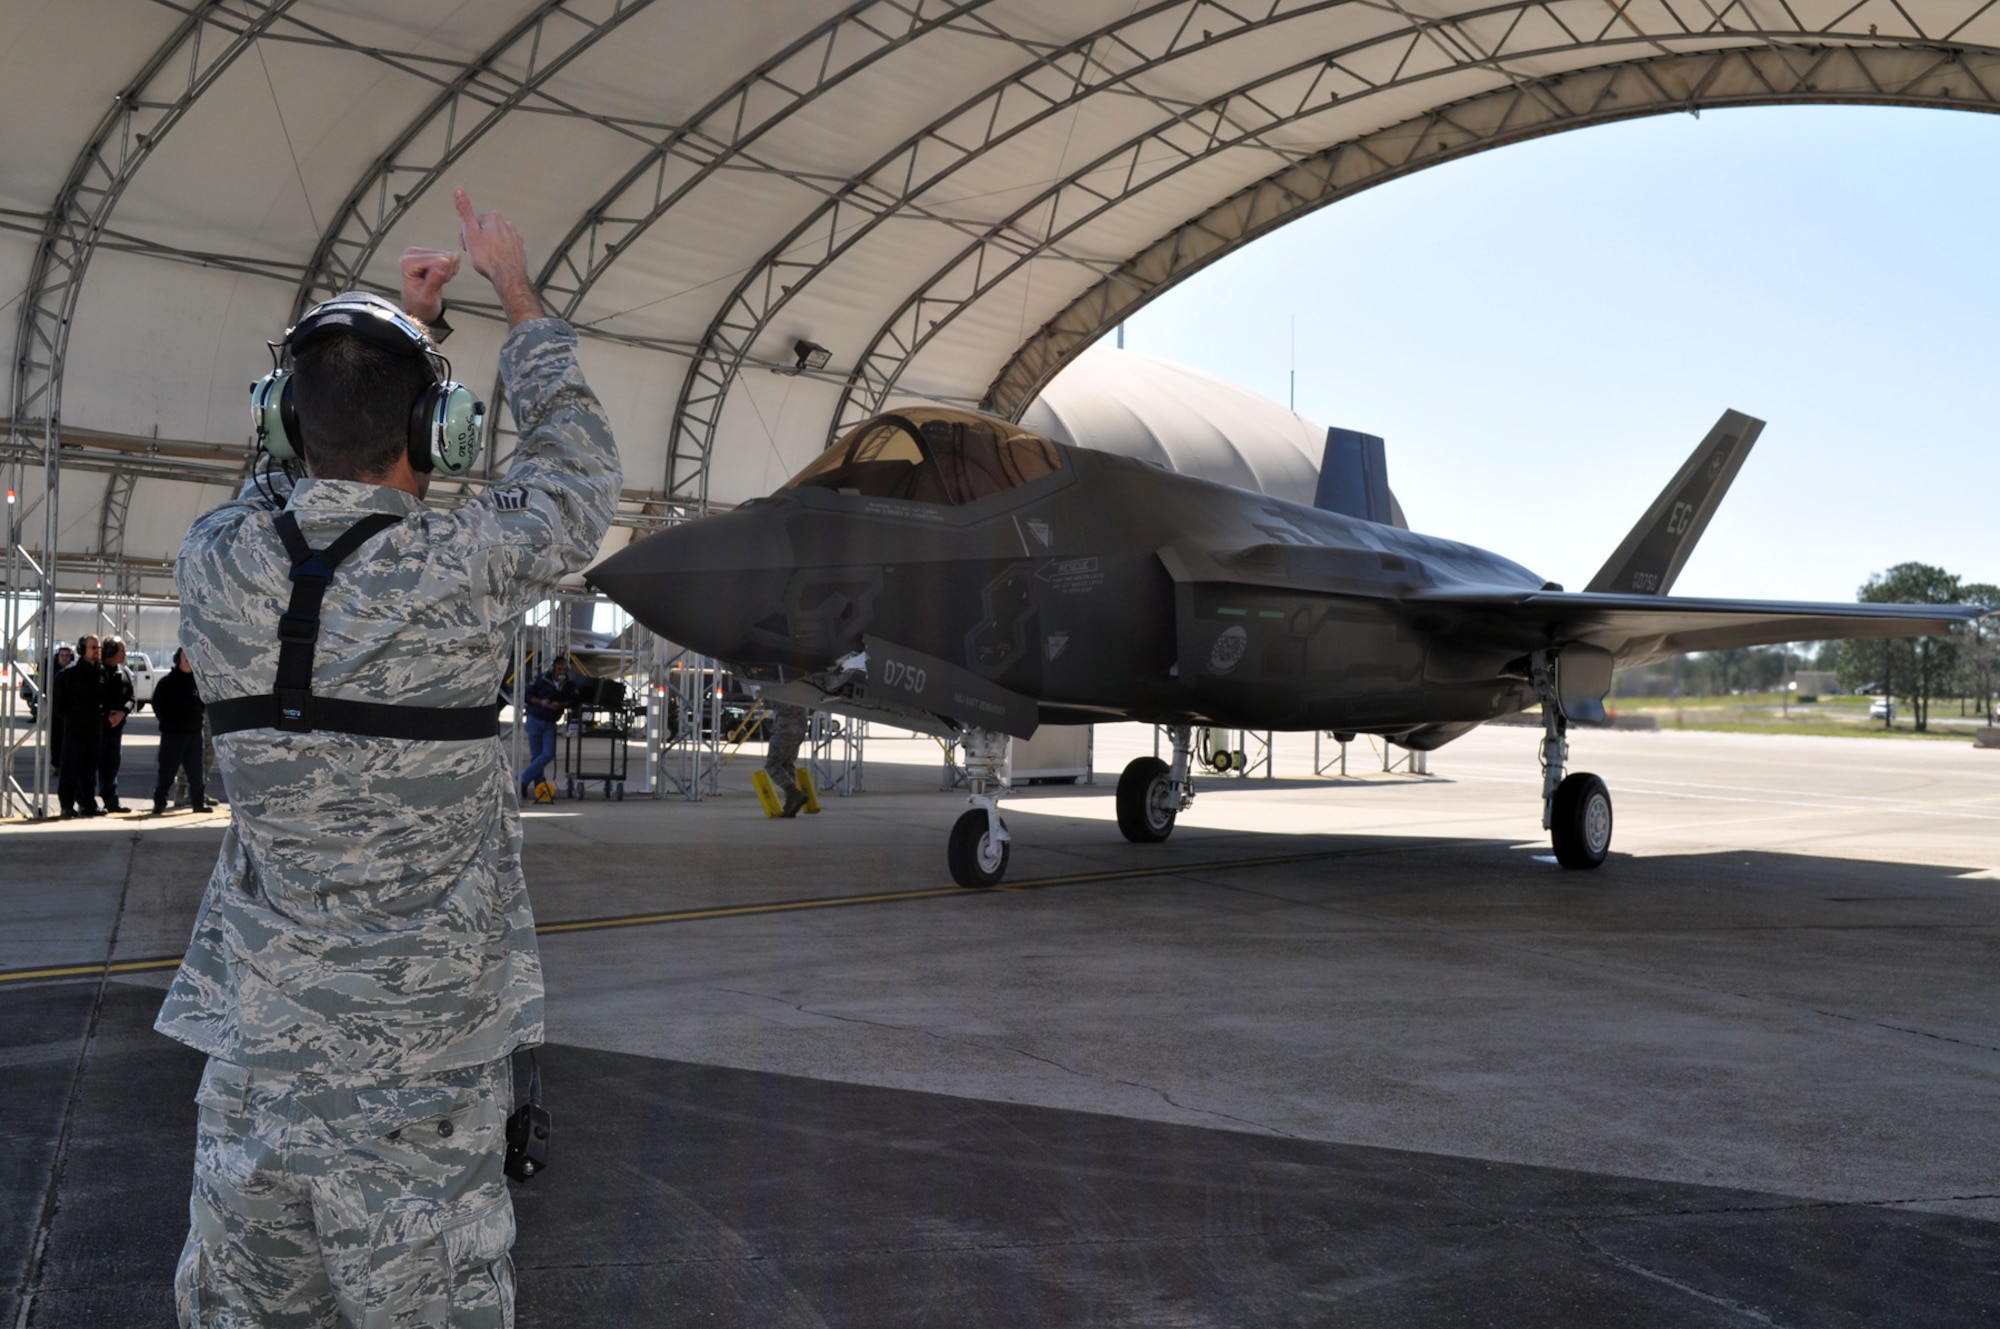 Staff Sgt. Jeremy Hauser, 33rd Aircraft Maintenance Squadron, gives the "thumbs up" to taxi the aircraft to Lt. Col. Eric Smith, director of operations, 58 Fighter Squadron, who flew  the first F-35 Lightning II flight at Eglin AFB, Fla., March 6. (U.S. Air Force photo/Maj. Karen Roganov)